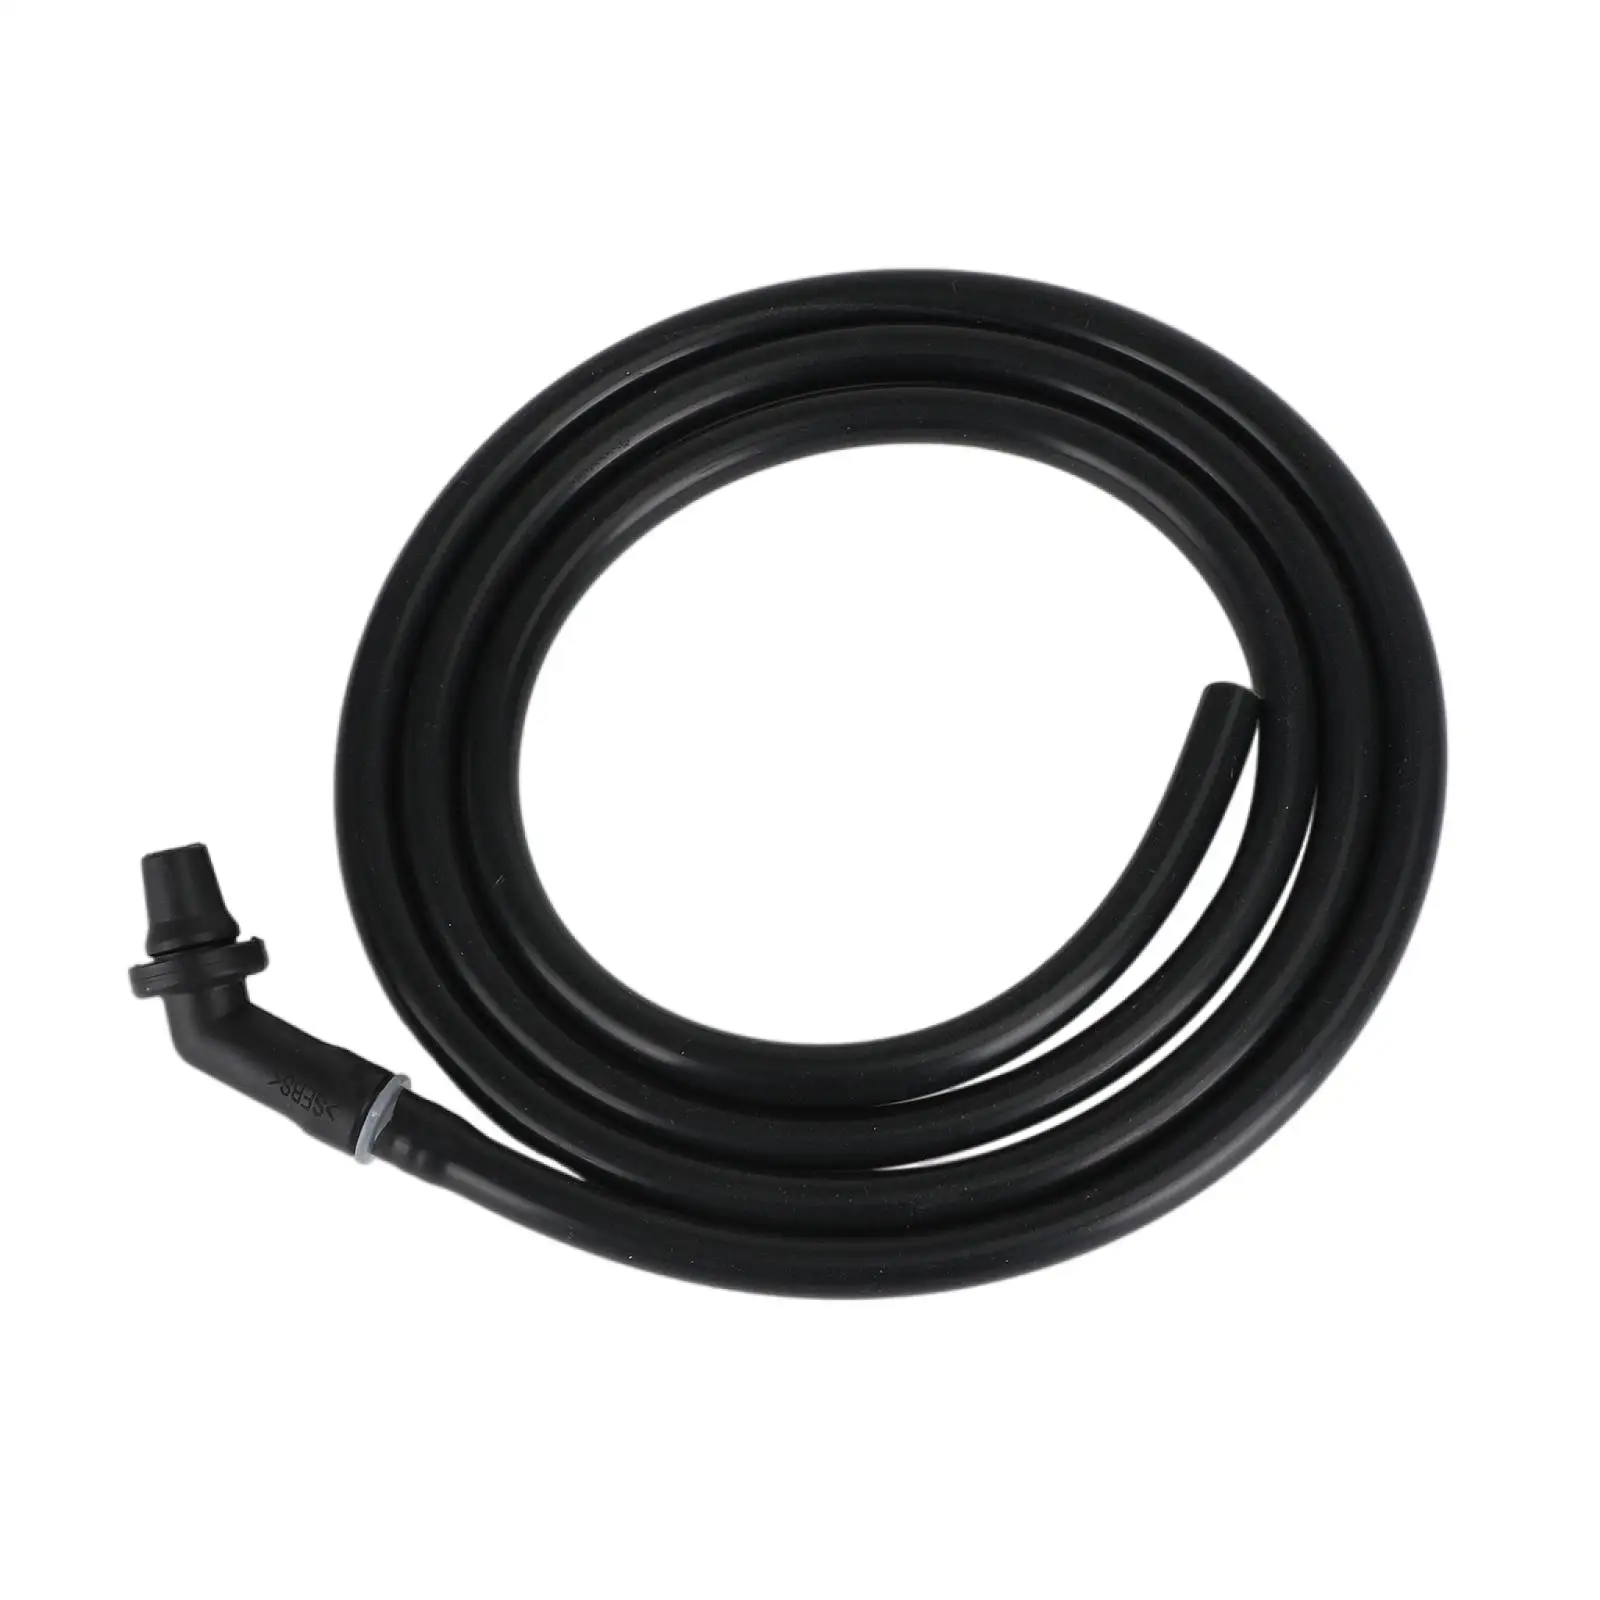 Sunroof Front Drain Hose Water Tube, Eeh500100, Black, for Landrover Discovery